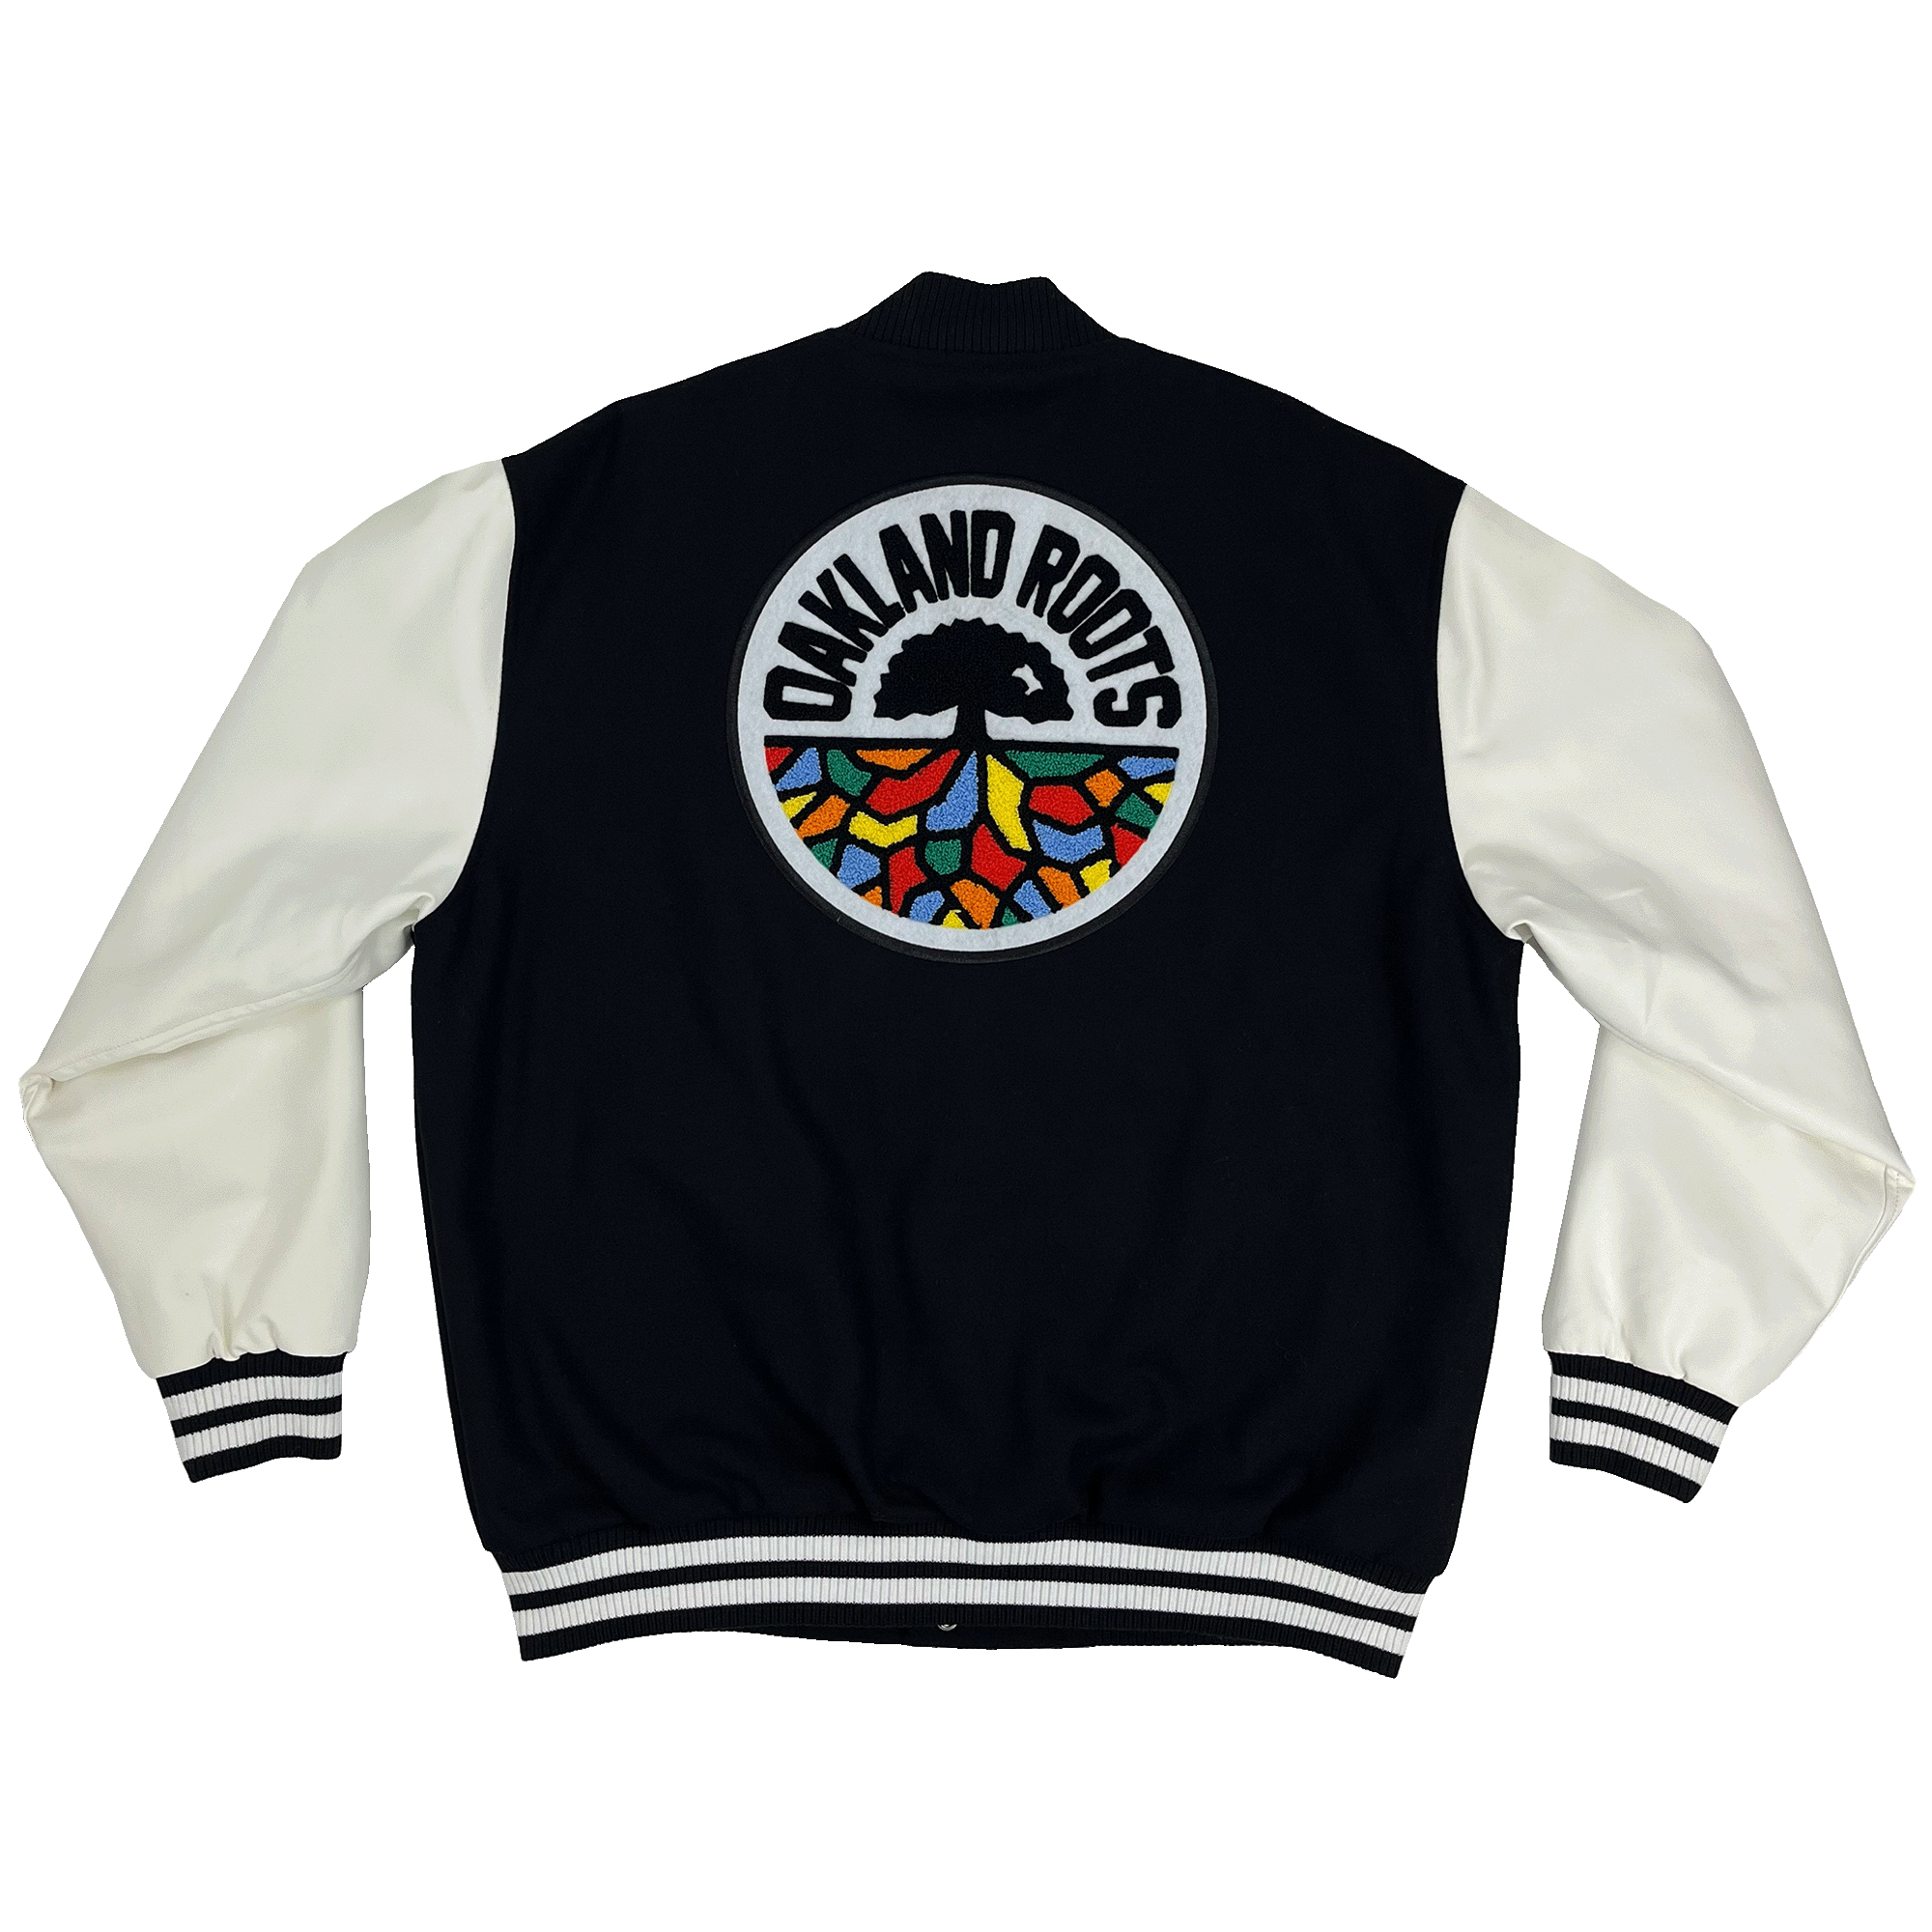 Backside view of a black varsity jacket with white sleeves and black and white striped trim with a large full-color Oakland Roots logo in the center of the back.